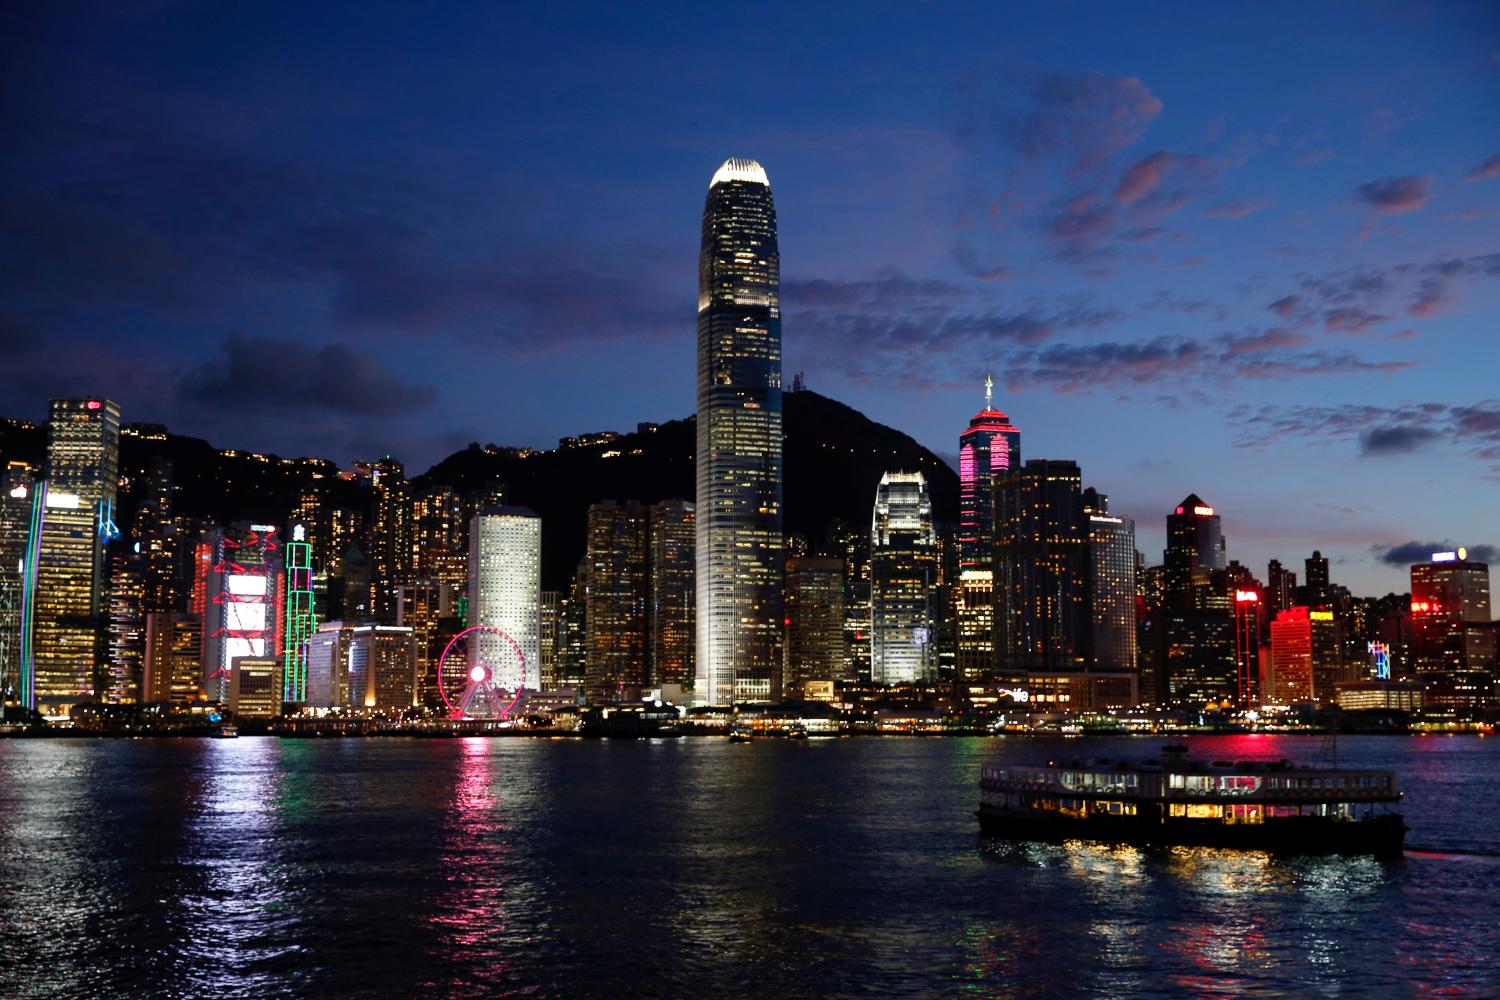 FILE PHOTO: A Star Ferry boat crosses Victoria Harbour in front of a skyline of buildings during sunset in Hong Kong, China June 29, 2020. REUTERS/Tyrone Siu/File Photo